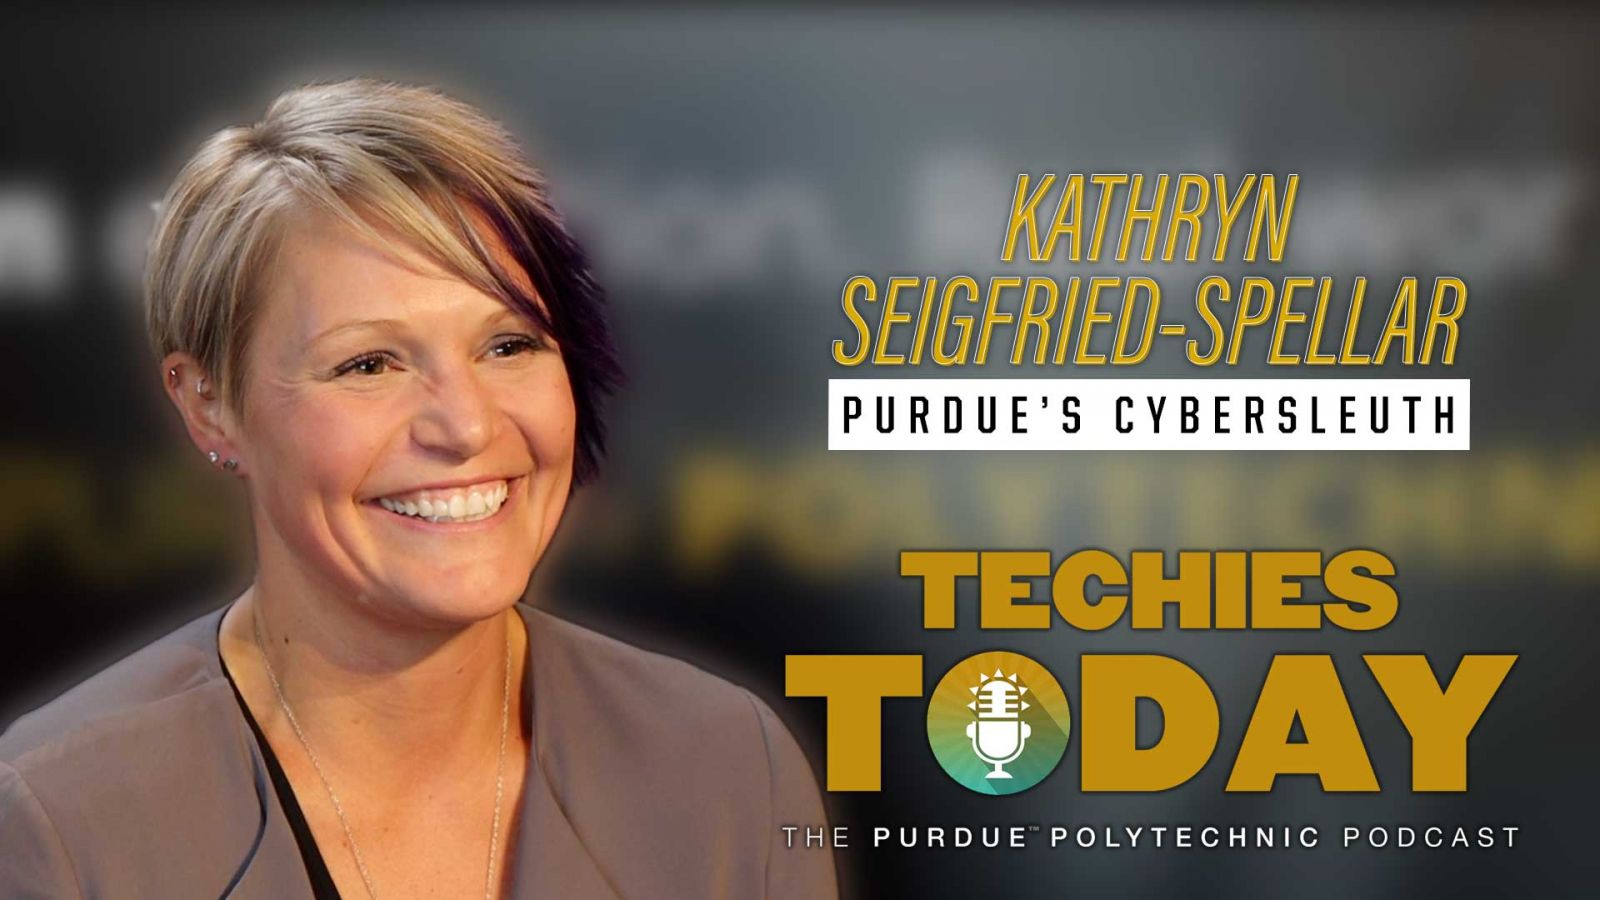 Kathryn Seigfried-Spellar, Purdue's CyberSleuth, on Techies Today, the Purdue Polytechnic Podcast